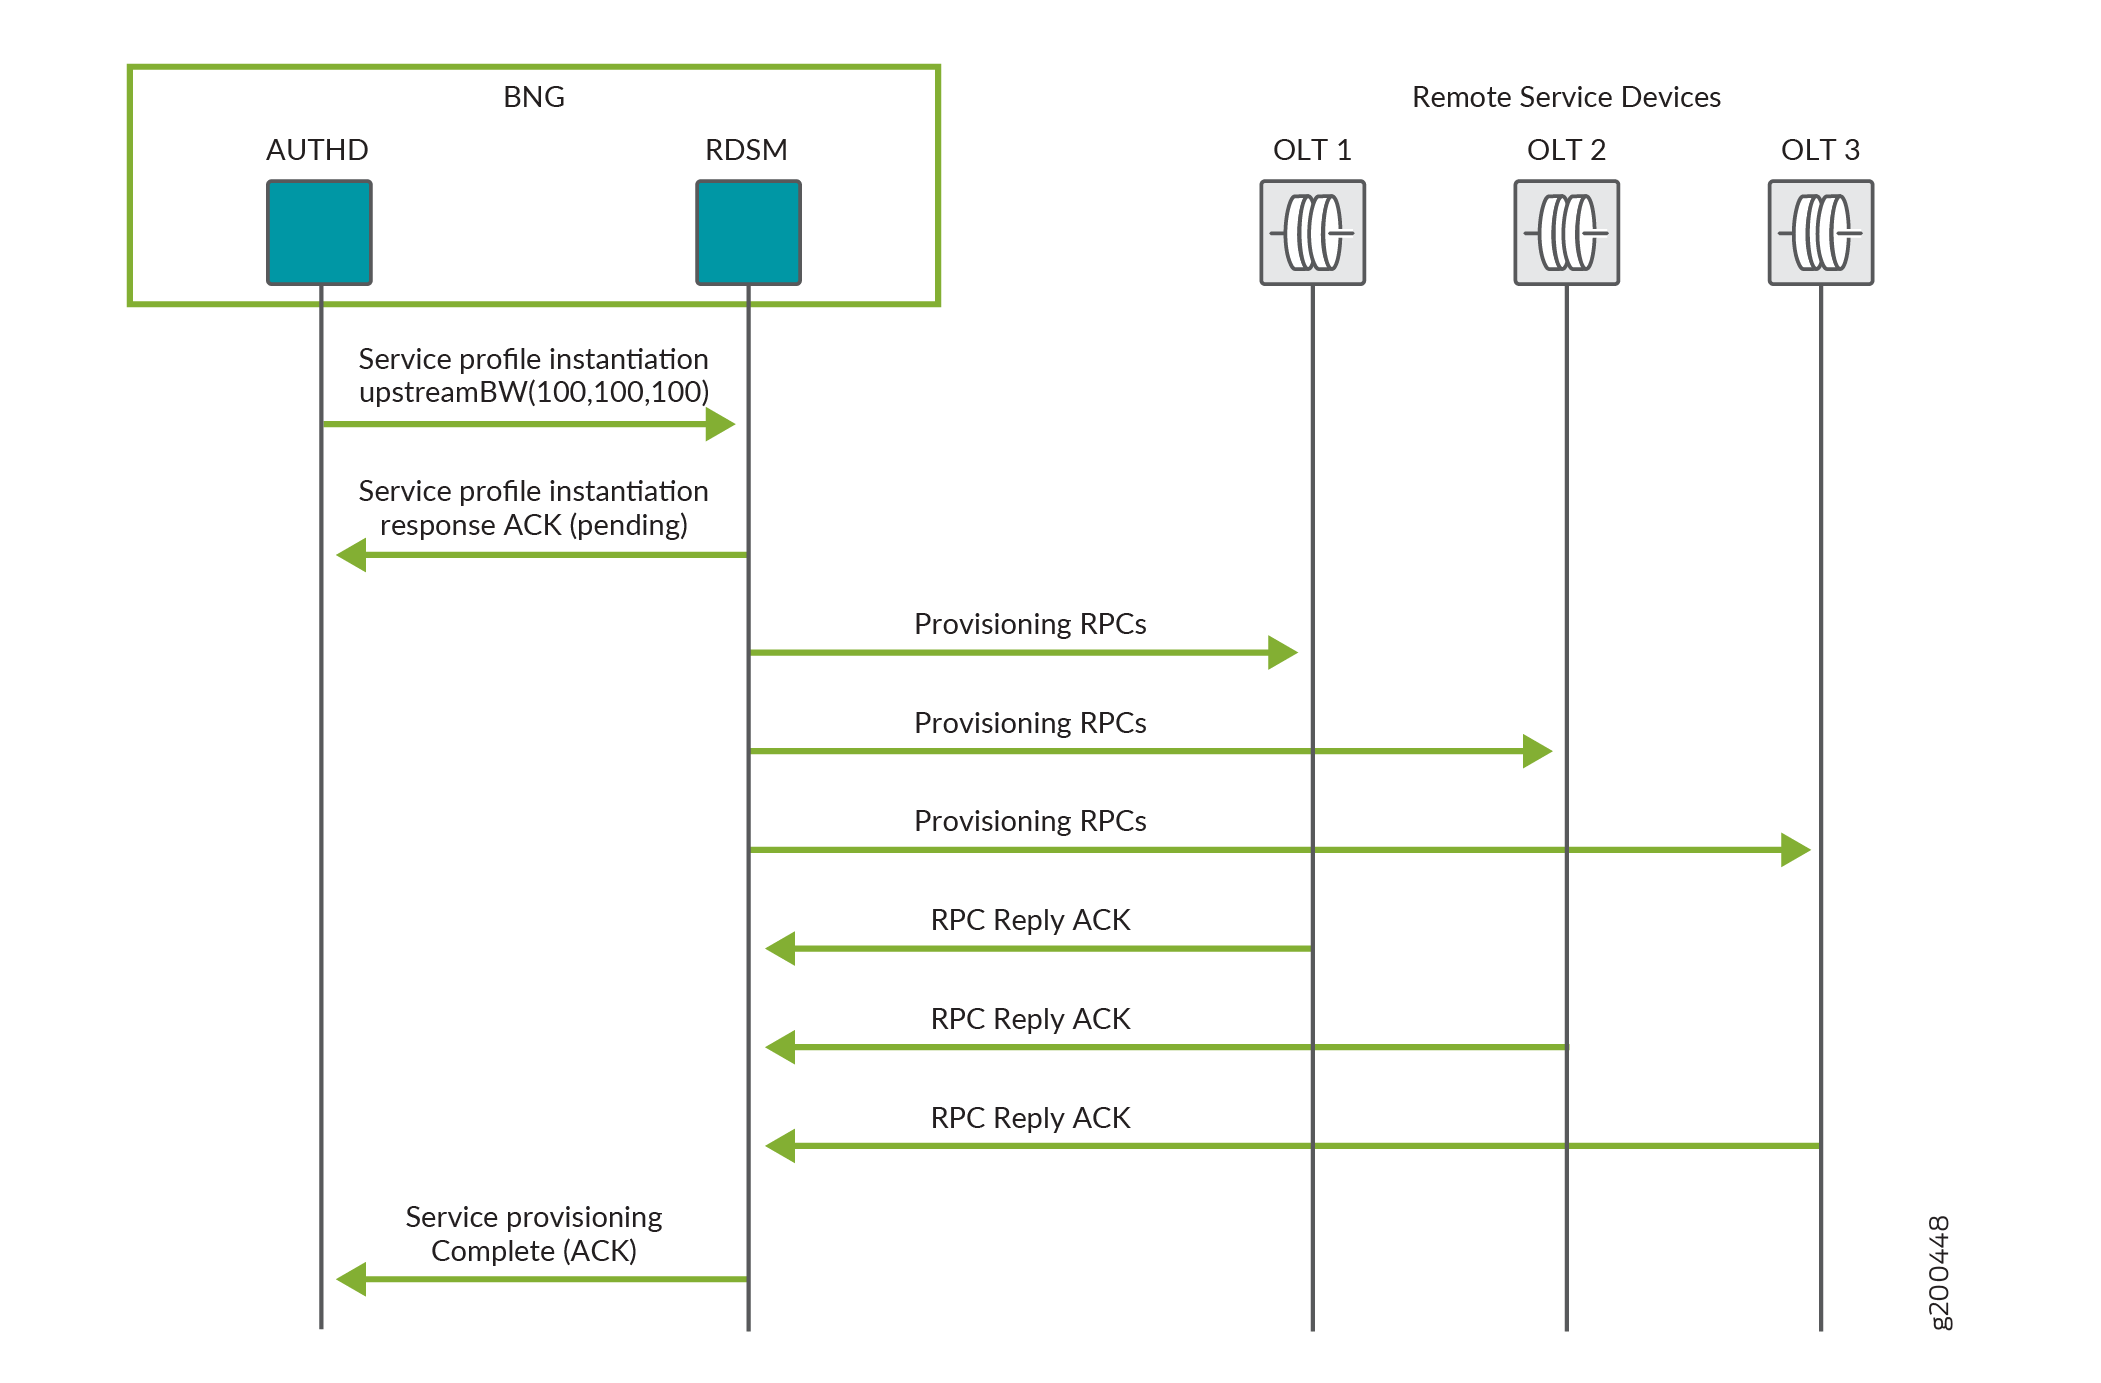 RDSM Service Provisioning on a Remote Device: Successful Subscriber Negotiation Flow